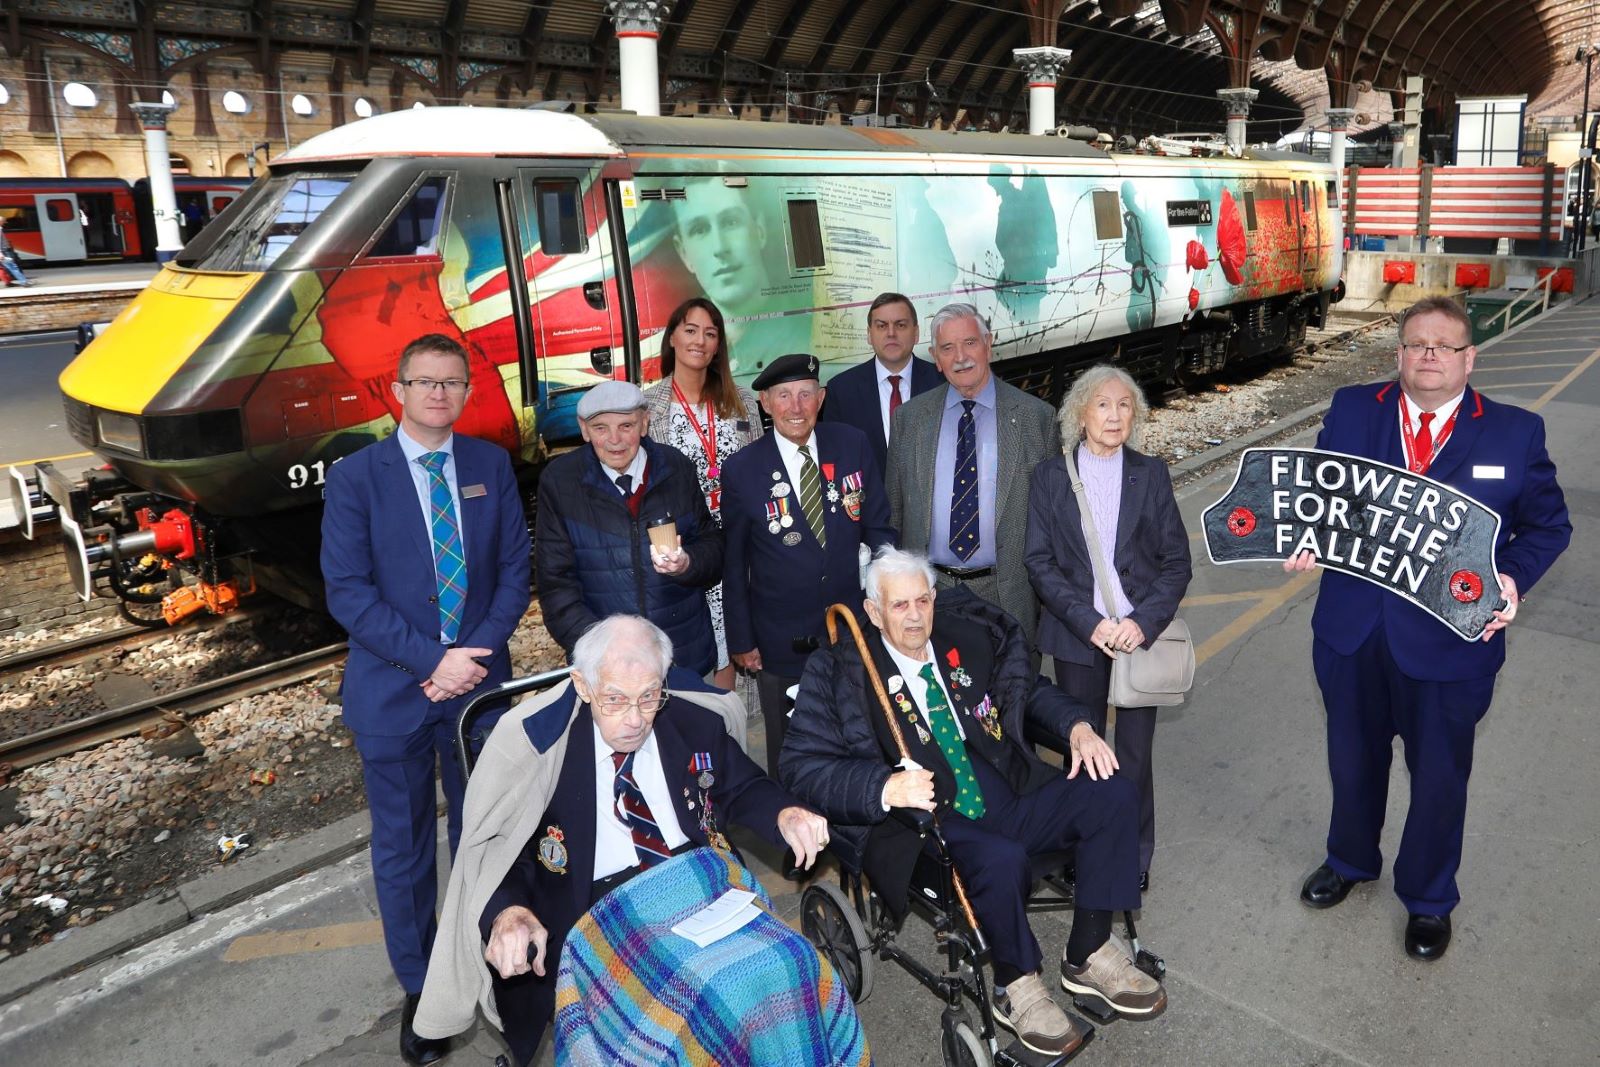 Tributes Paid To Two Railway Workers On The 80th Anniversary Of The WWII Bombing Of York Railway Station